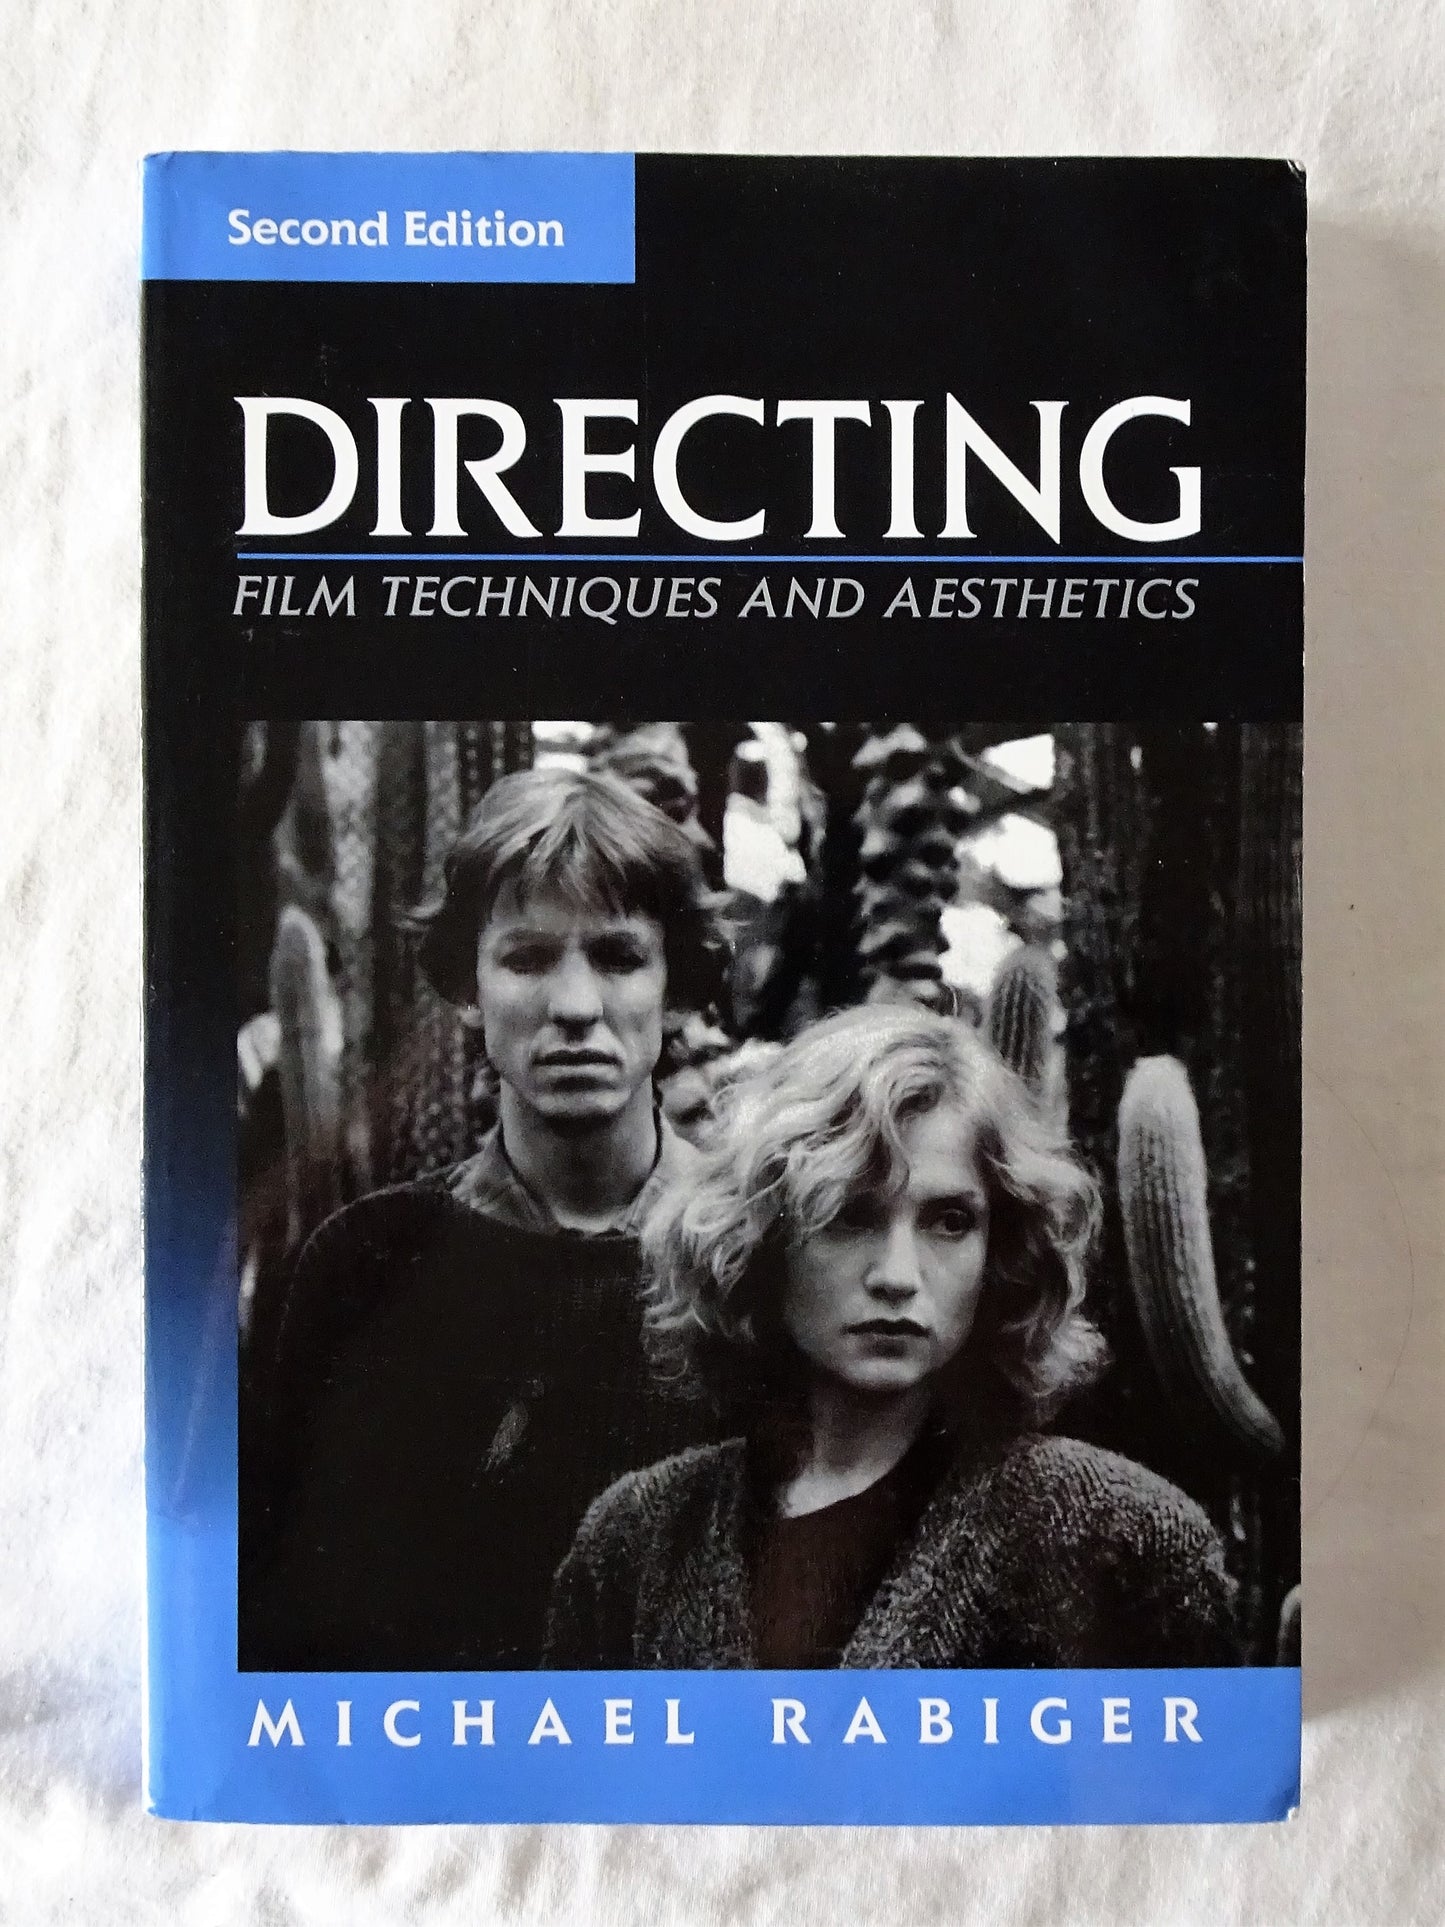 Directing Film Techniques and Aesthetics by Michael Rabiger